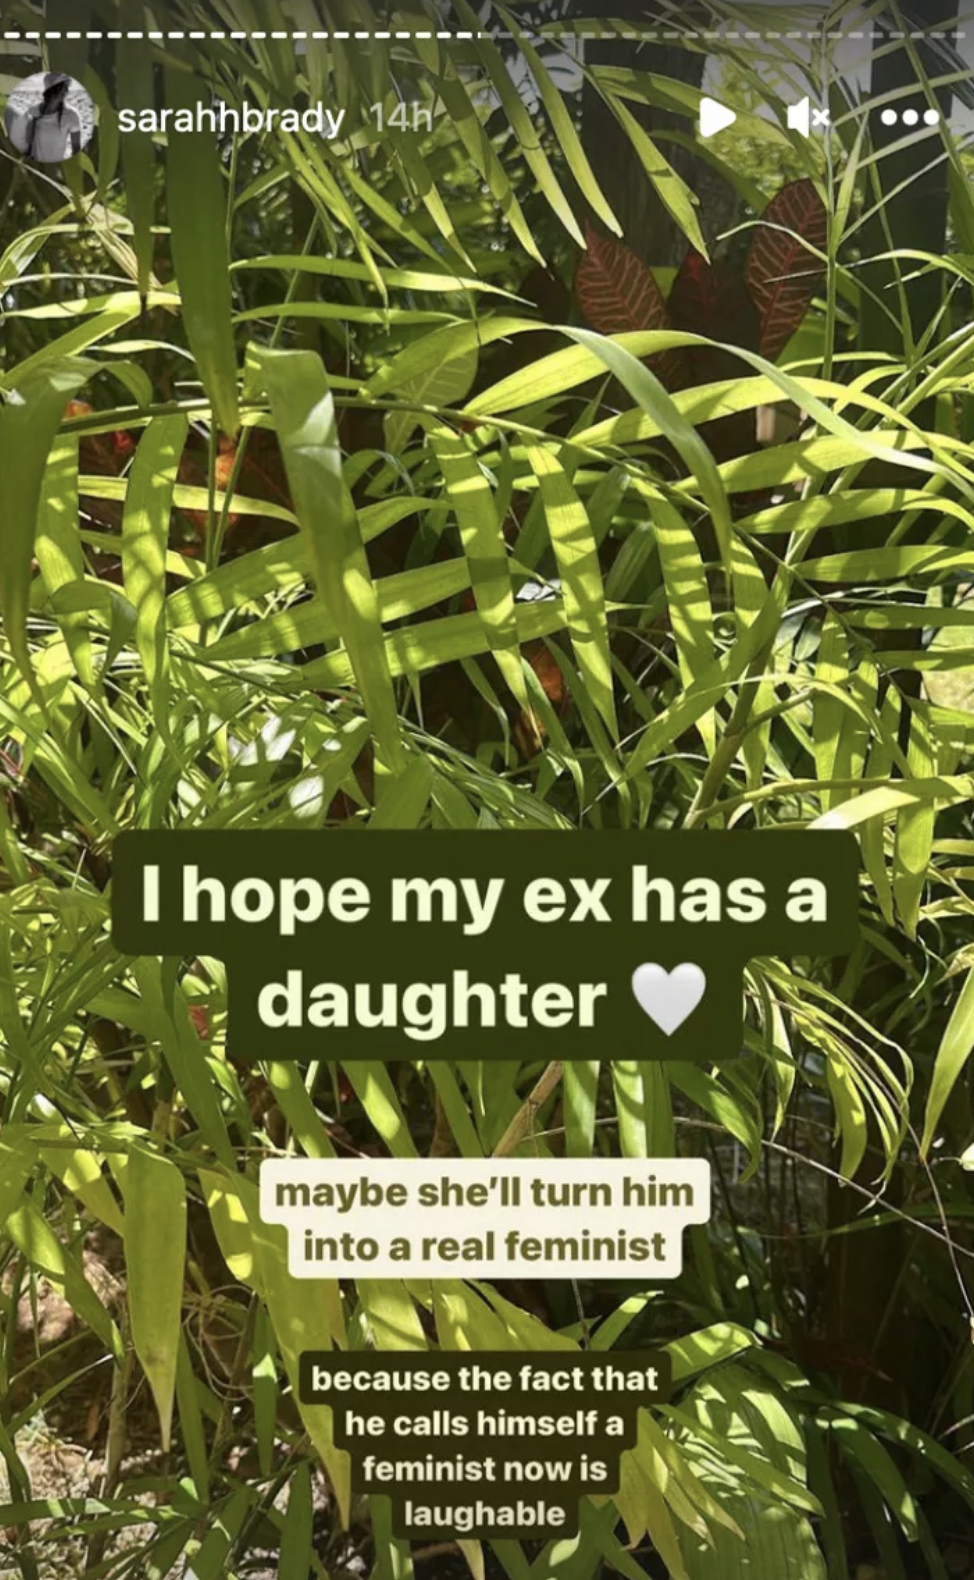 Screenshot of her IG comment: &quot;I hope my ex has a daughter / maybe she&#x27;ll turn him into a real feminist / because the fact that he calls himself a feminist now is laughable&quot;